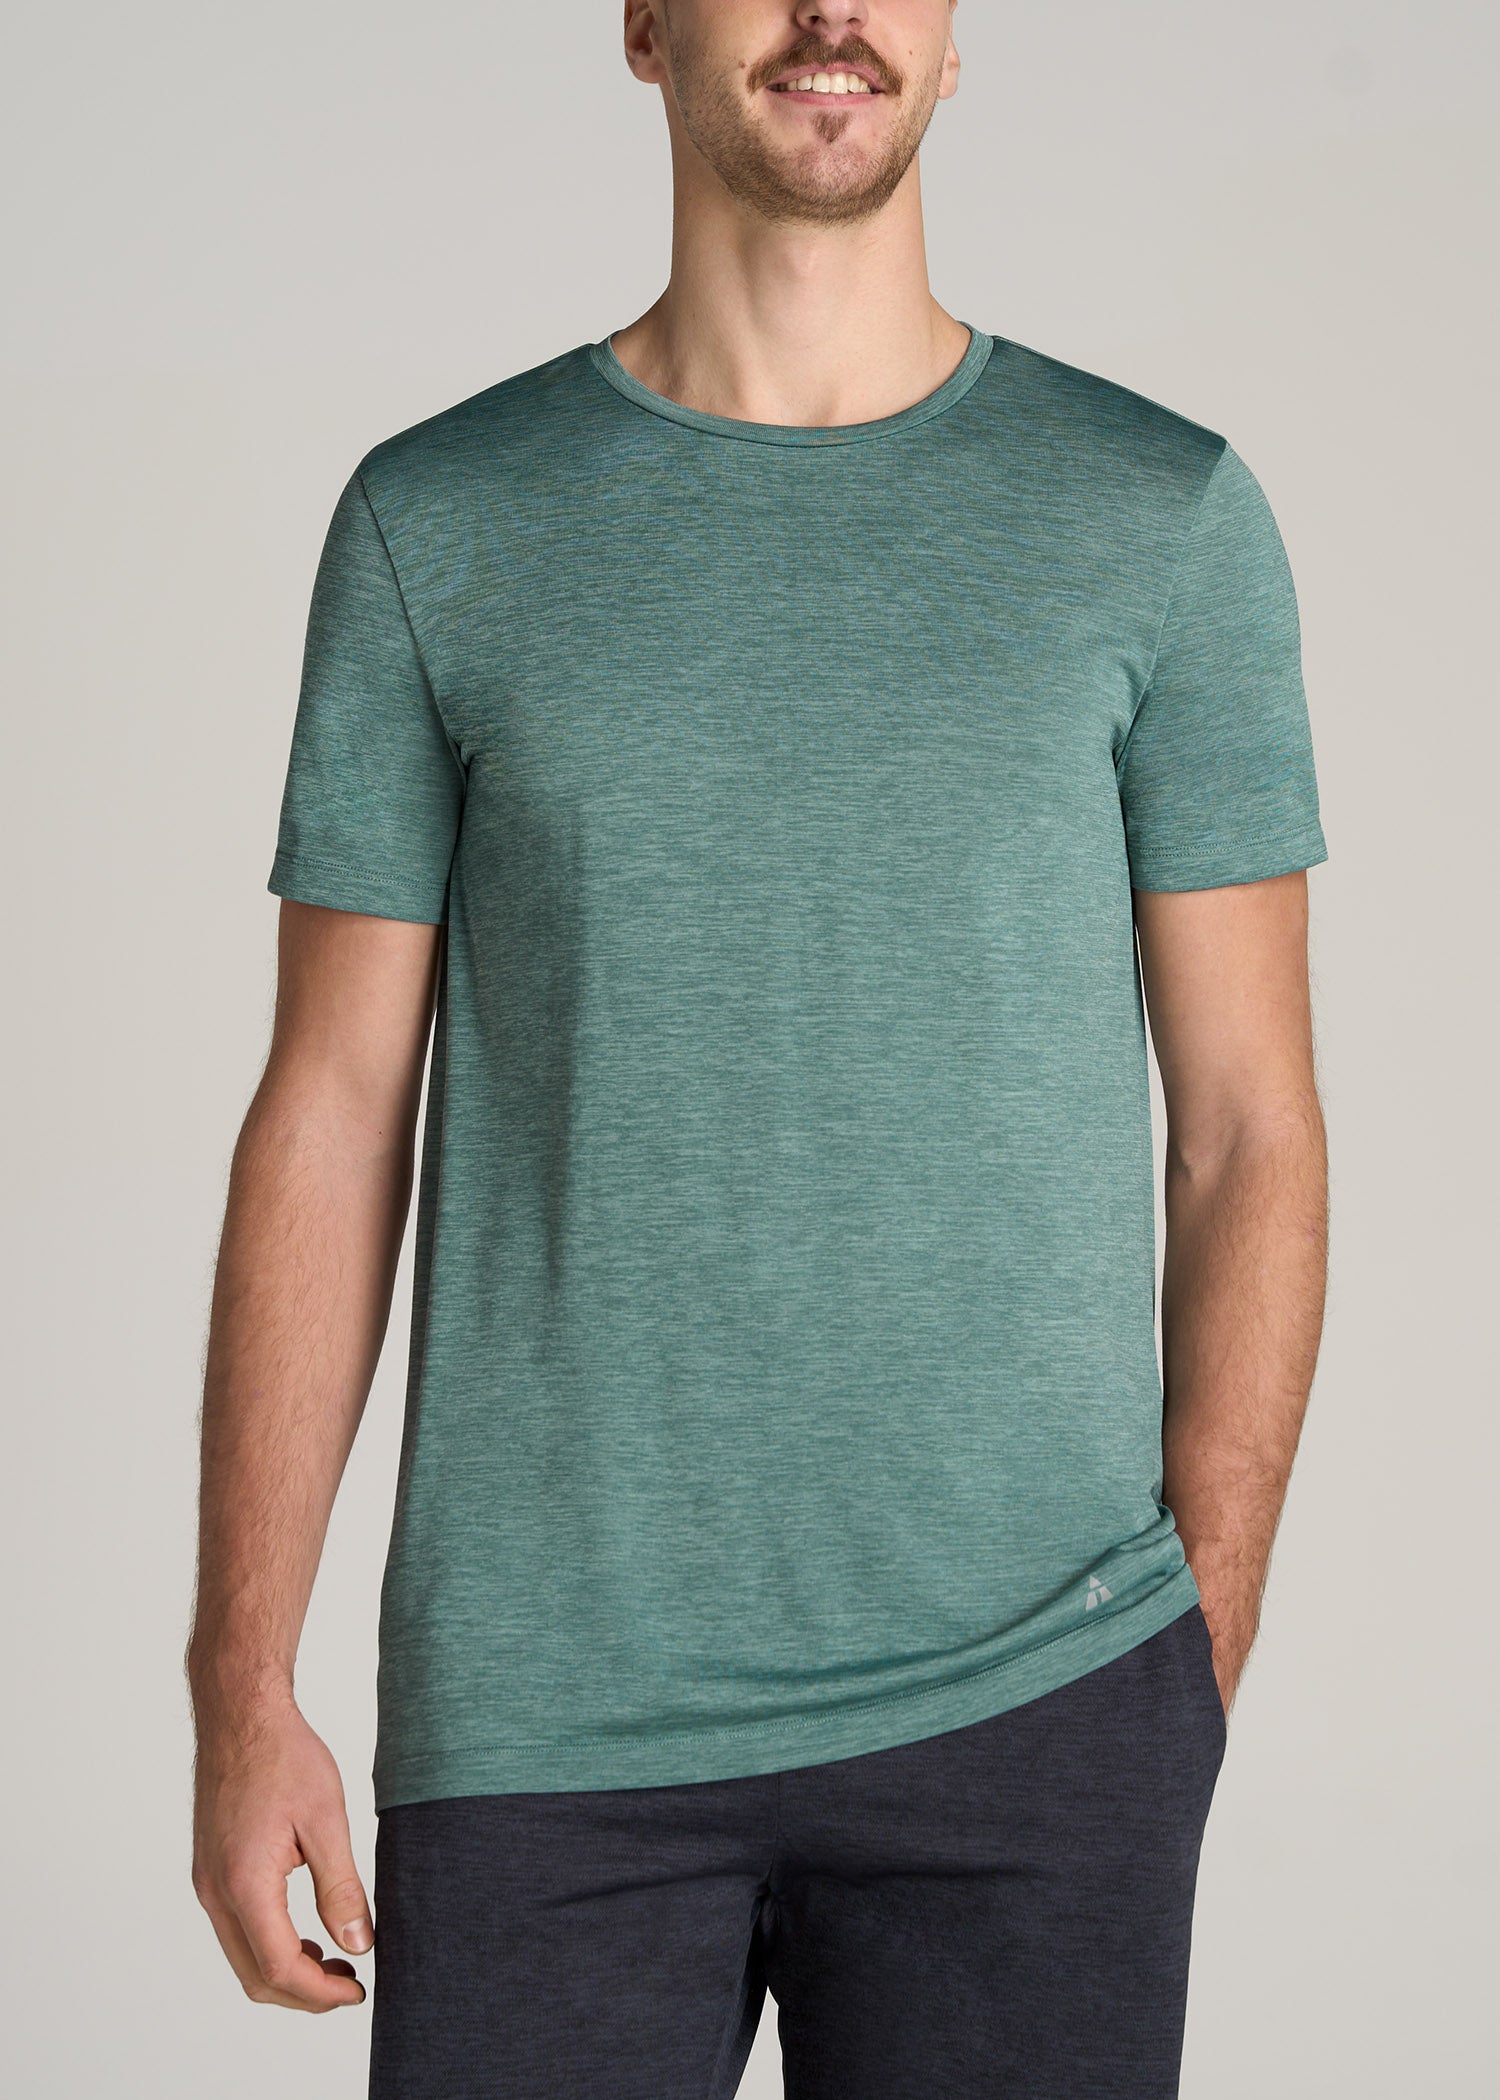     American-Tall-Men-Performance-MODERN-FIT-Athletic-Jersey-Tee-Green-Mix-front